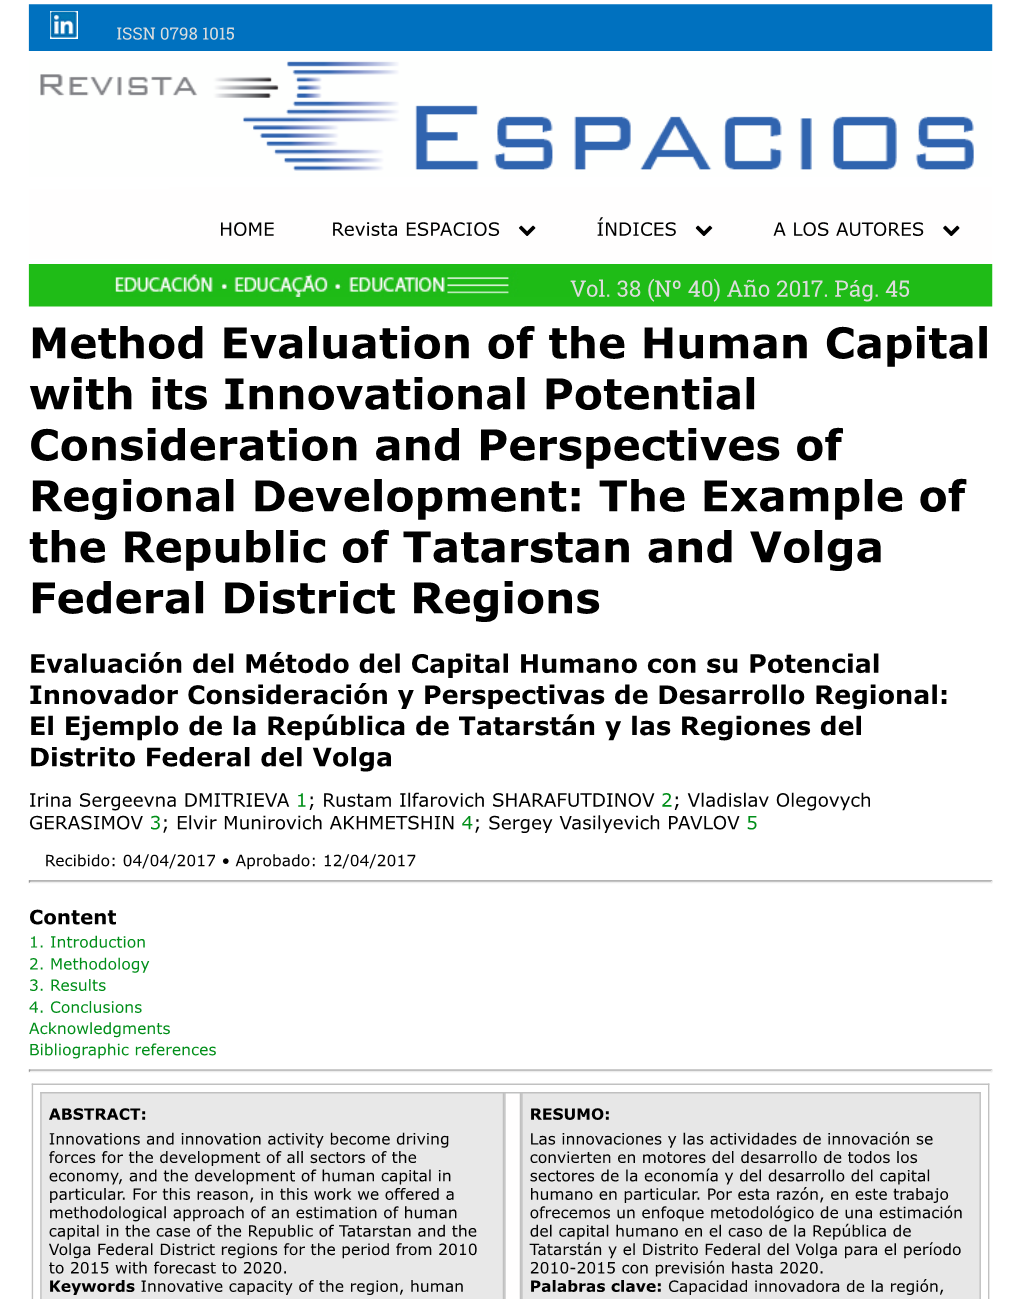 Method Evaluation of the Human Capital with Its